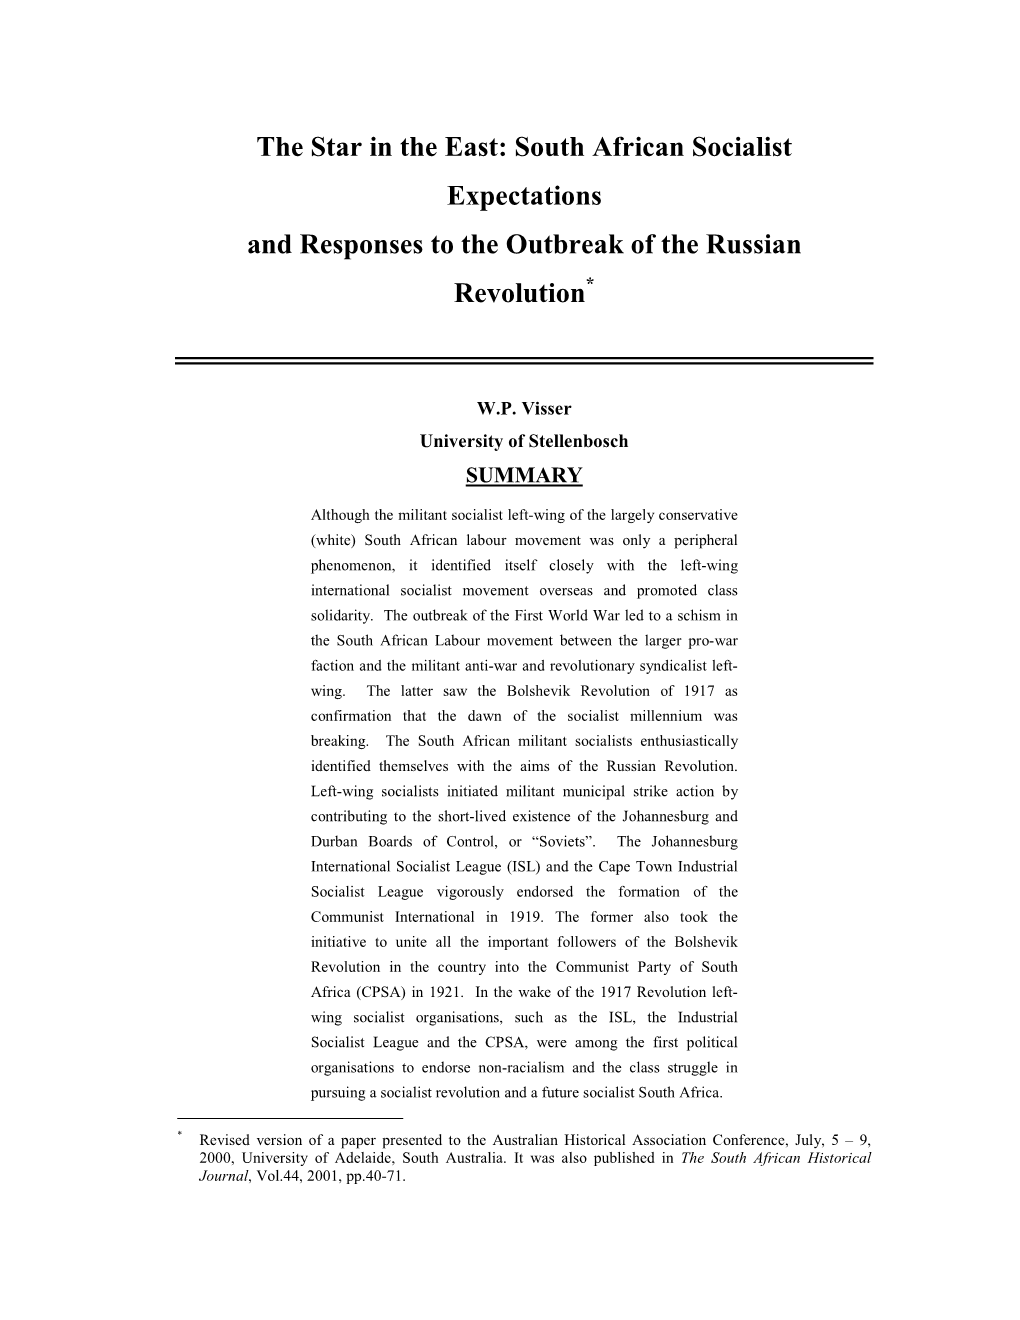 South African Socialist Expectations and Responses to the Outbreak of the Russian Revolution *